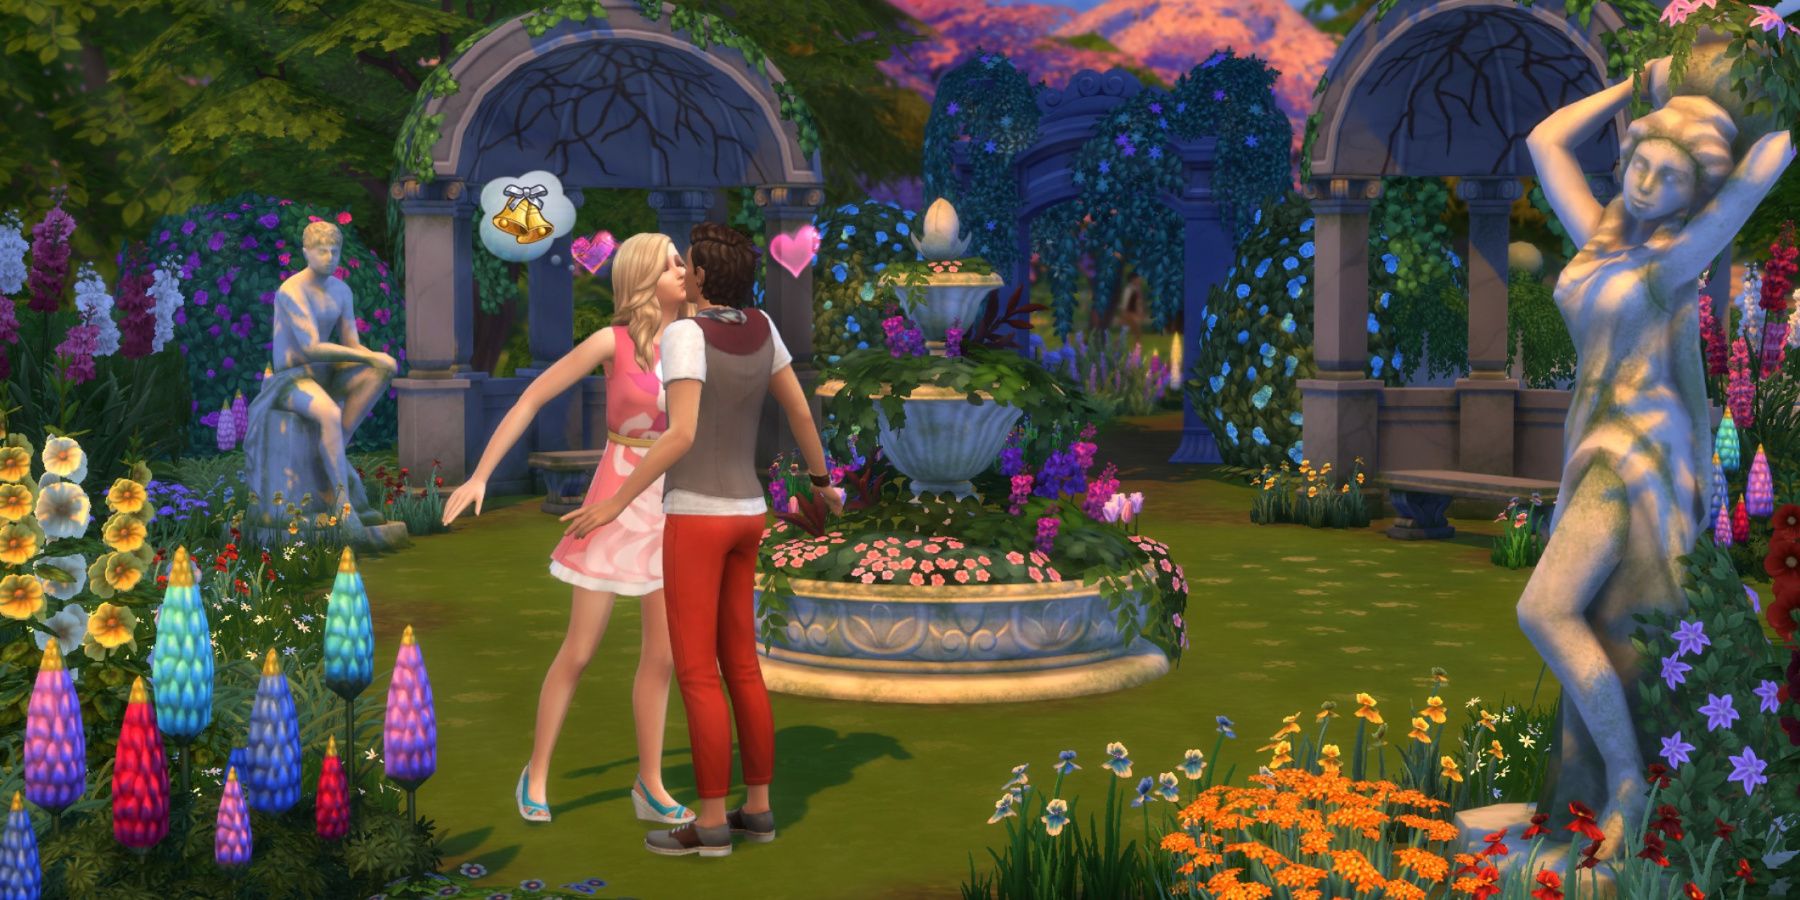 Two Sims kiss in an ornate garden in Sims 4